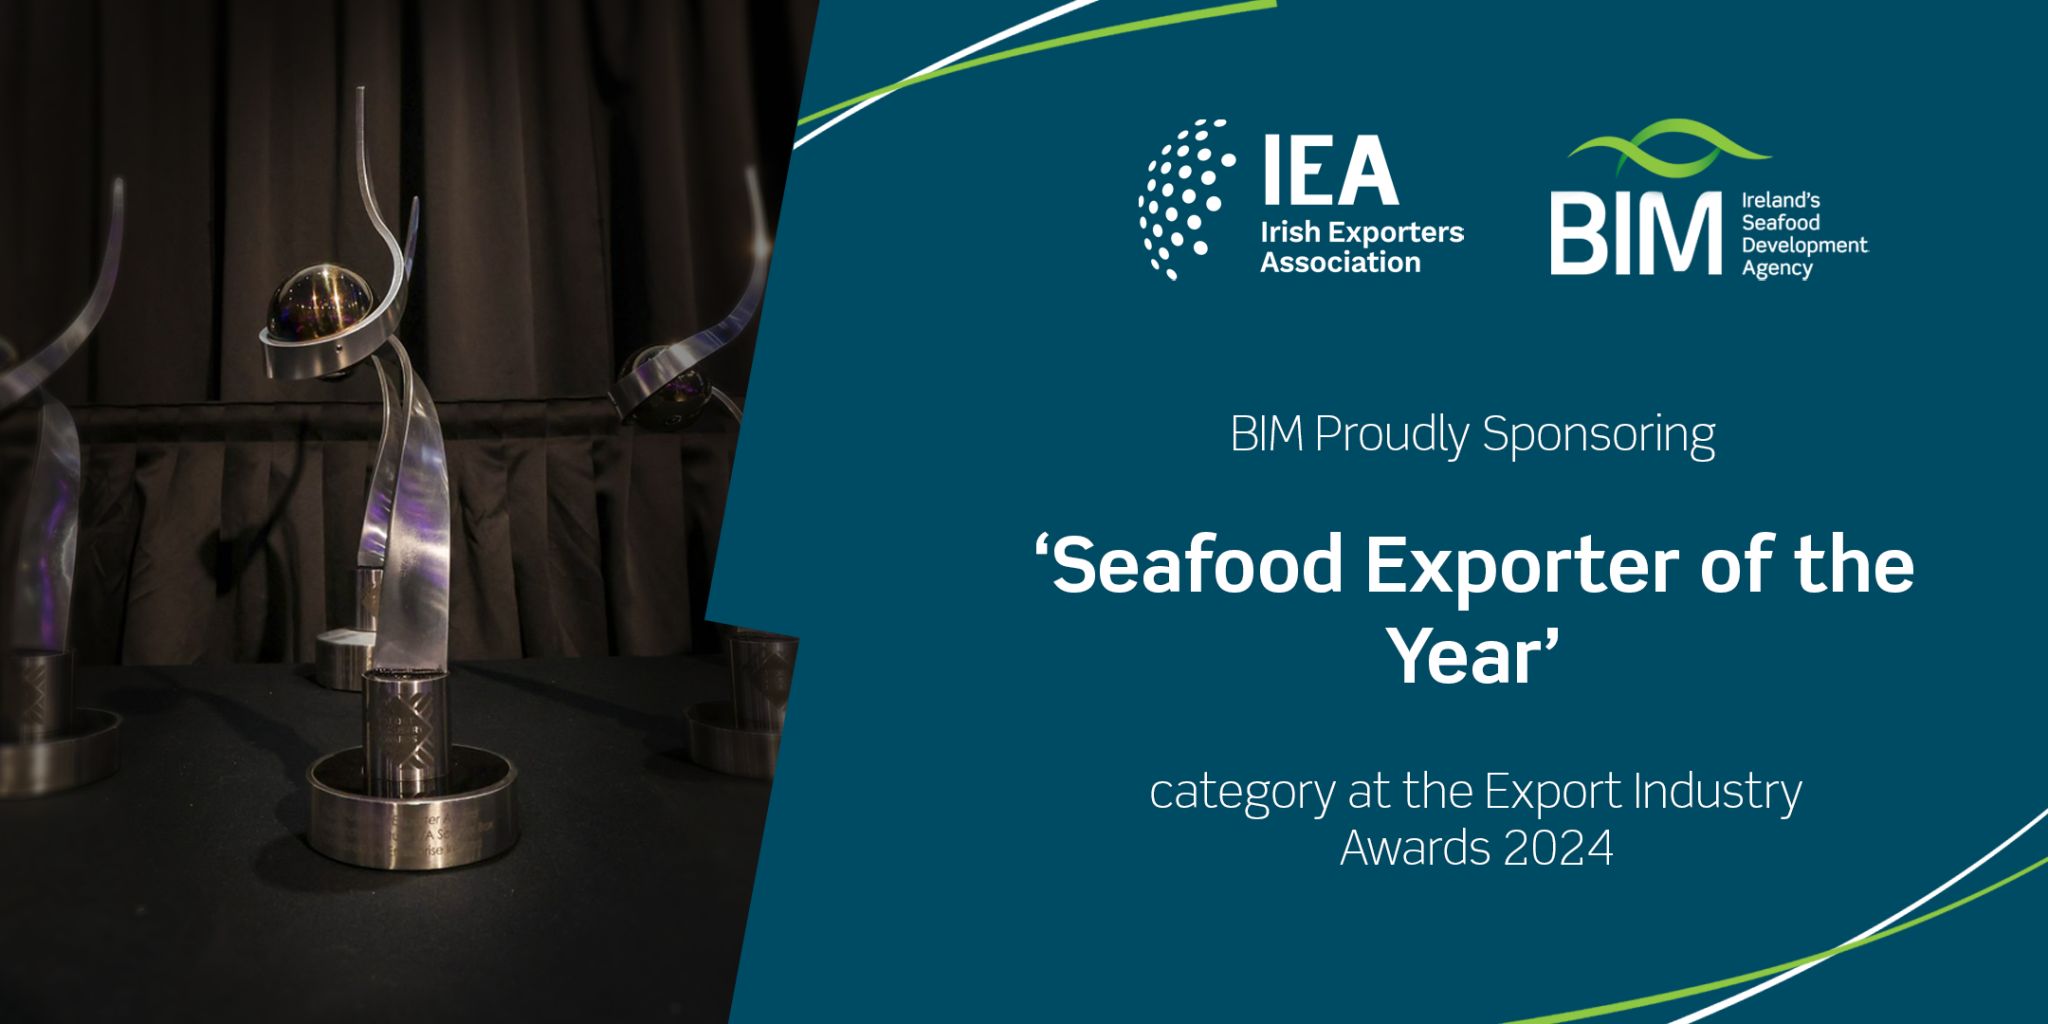 BIM sponsoring 'Seafood Exporter of the Year' category at the IEA Export Industry Awards